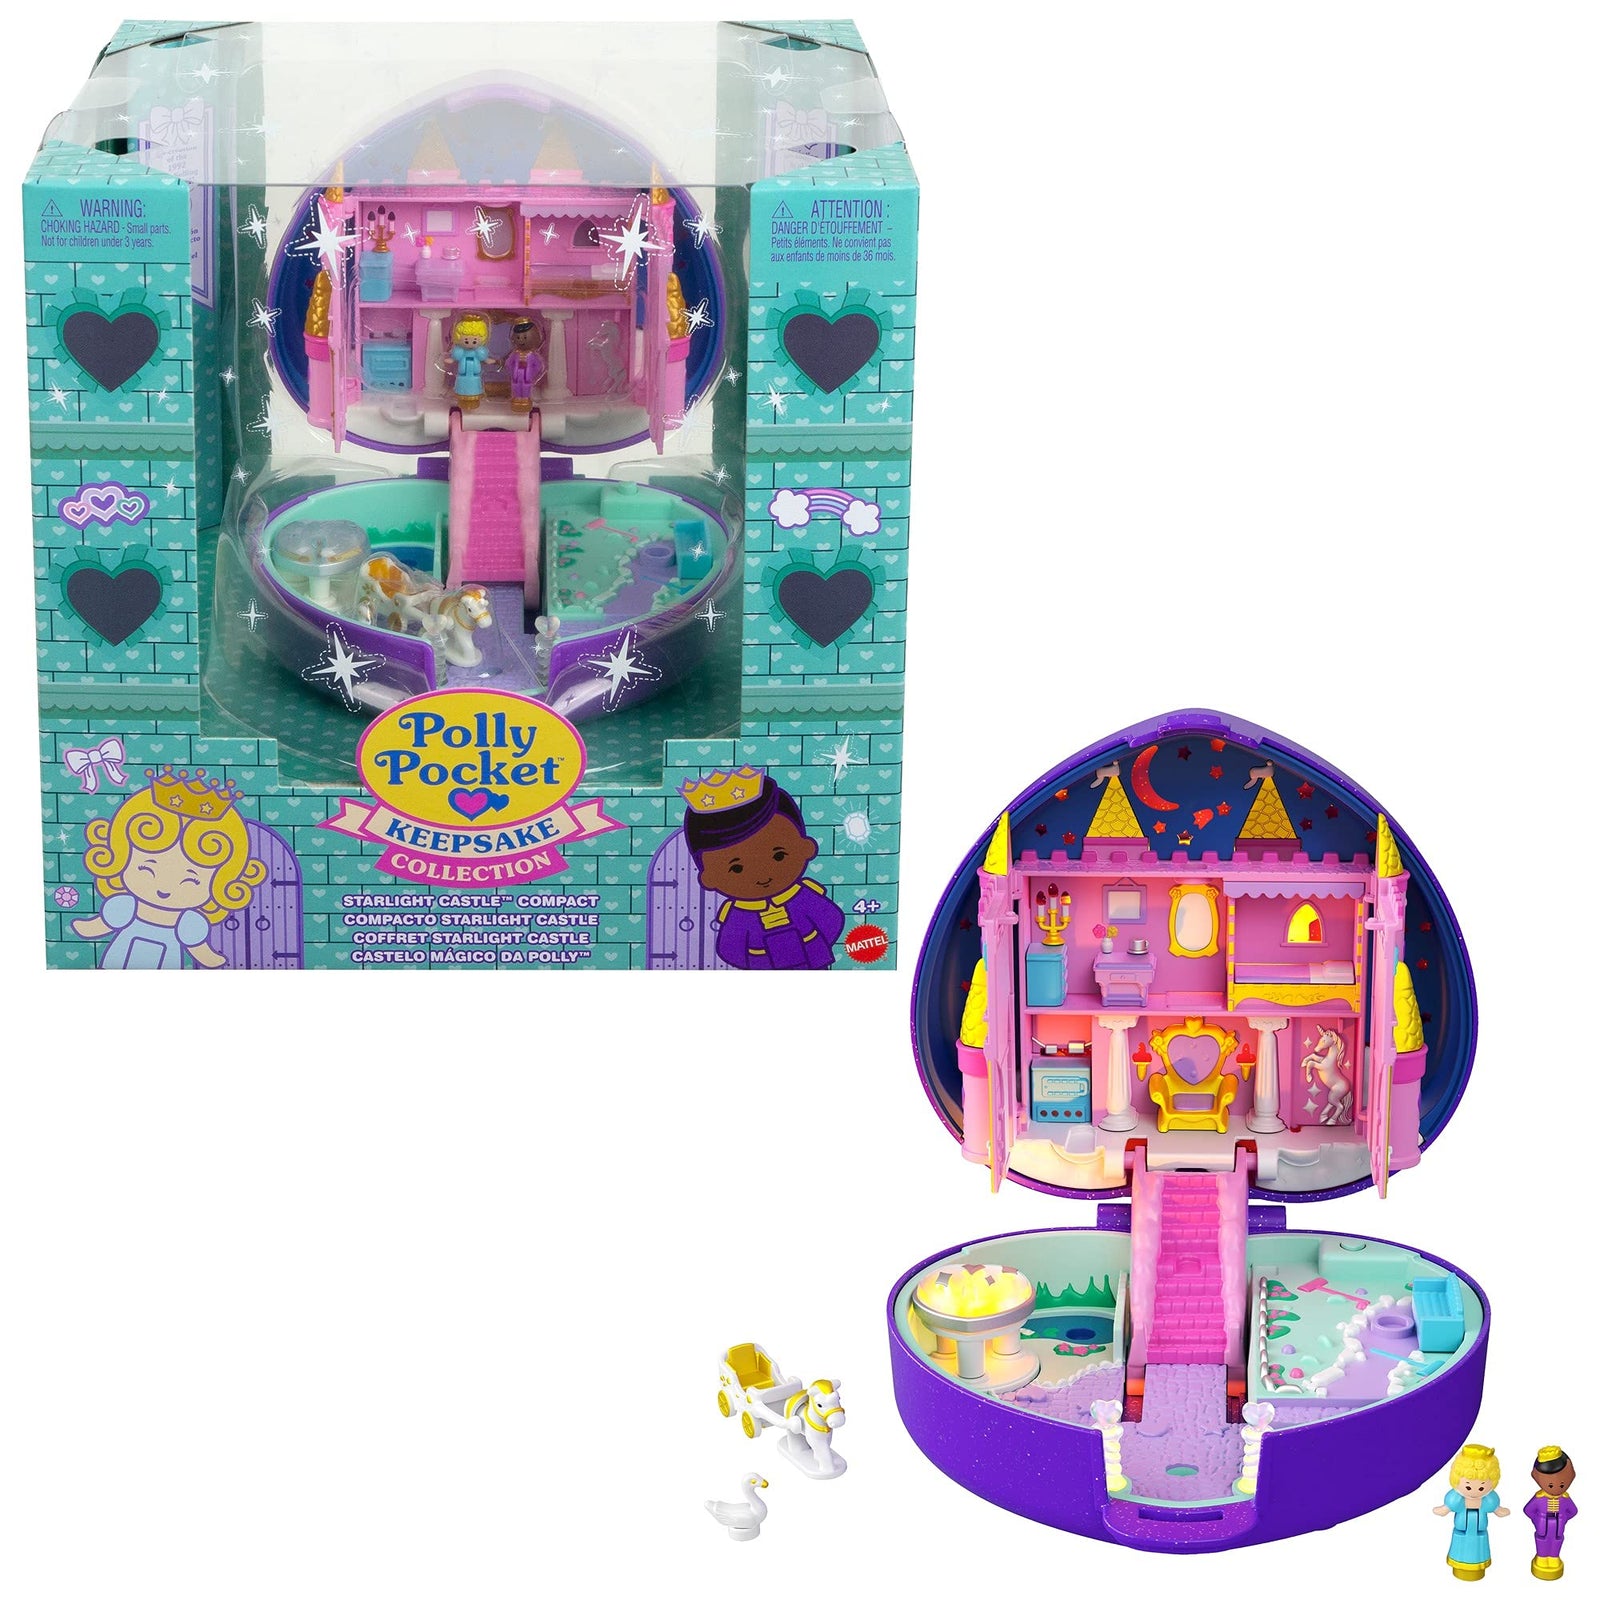 Polly Pocket Keepsake Collection Starlight Castle Compact, Enchanted Castle Theme, Special Box, Polly & Prince Dolls, Carriage, Swan & Unicorn Figures, Collectible Gift for Polly Fans